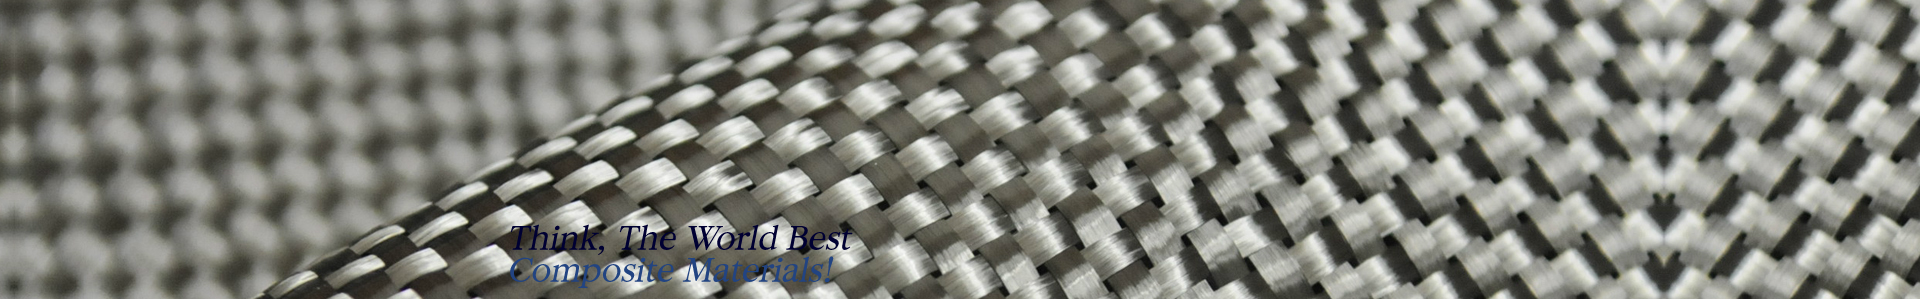 Think, The World Best Composite Materials!